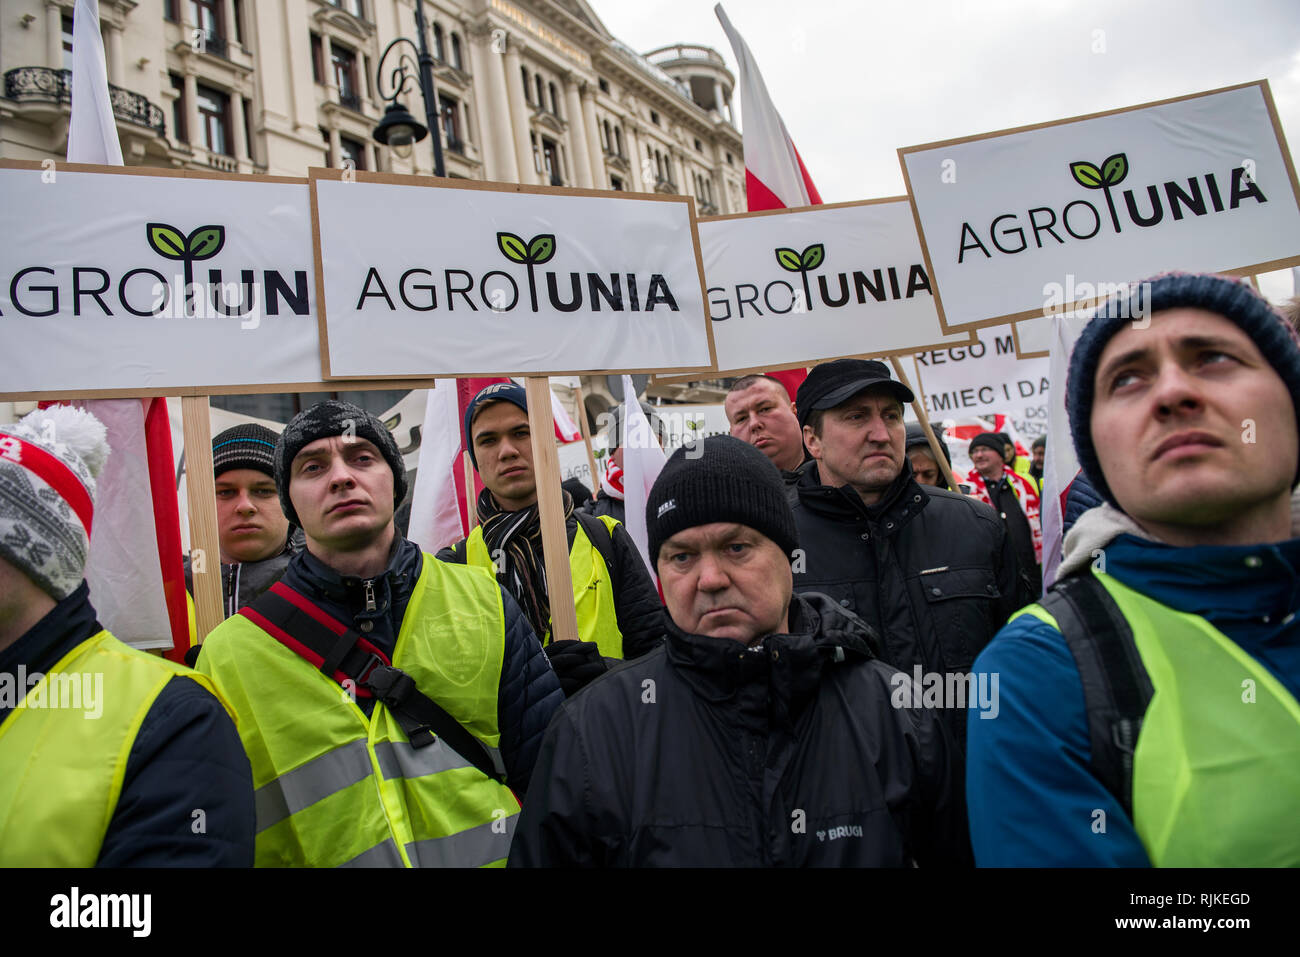 Polish farmers are seen holding placards during the protest. Thousands of farmers from across Poland staged a protest outside the presidential palace in Warsaw, demanding repayment of various compensations, control and restrictions over the imports of agricultural products as well as an increase of purchase prices, The demonstration was held by the Agrounia group and had been billed by farmers as the 'Siege of Warsaw.' Farmers took a coffin for the president as a symbol of the death of the polish agriculture. Stock Photo